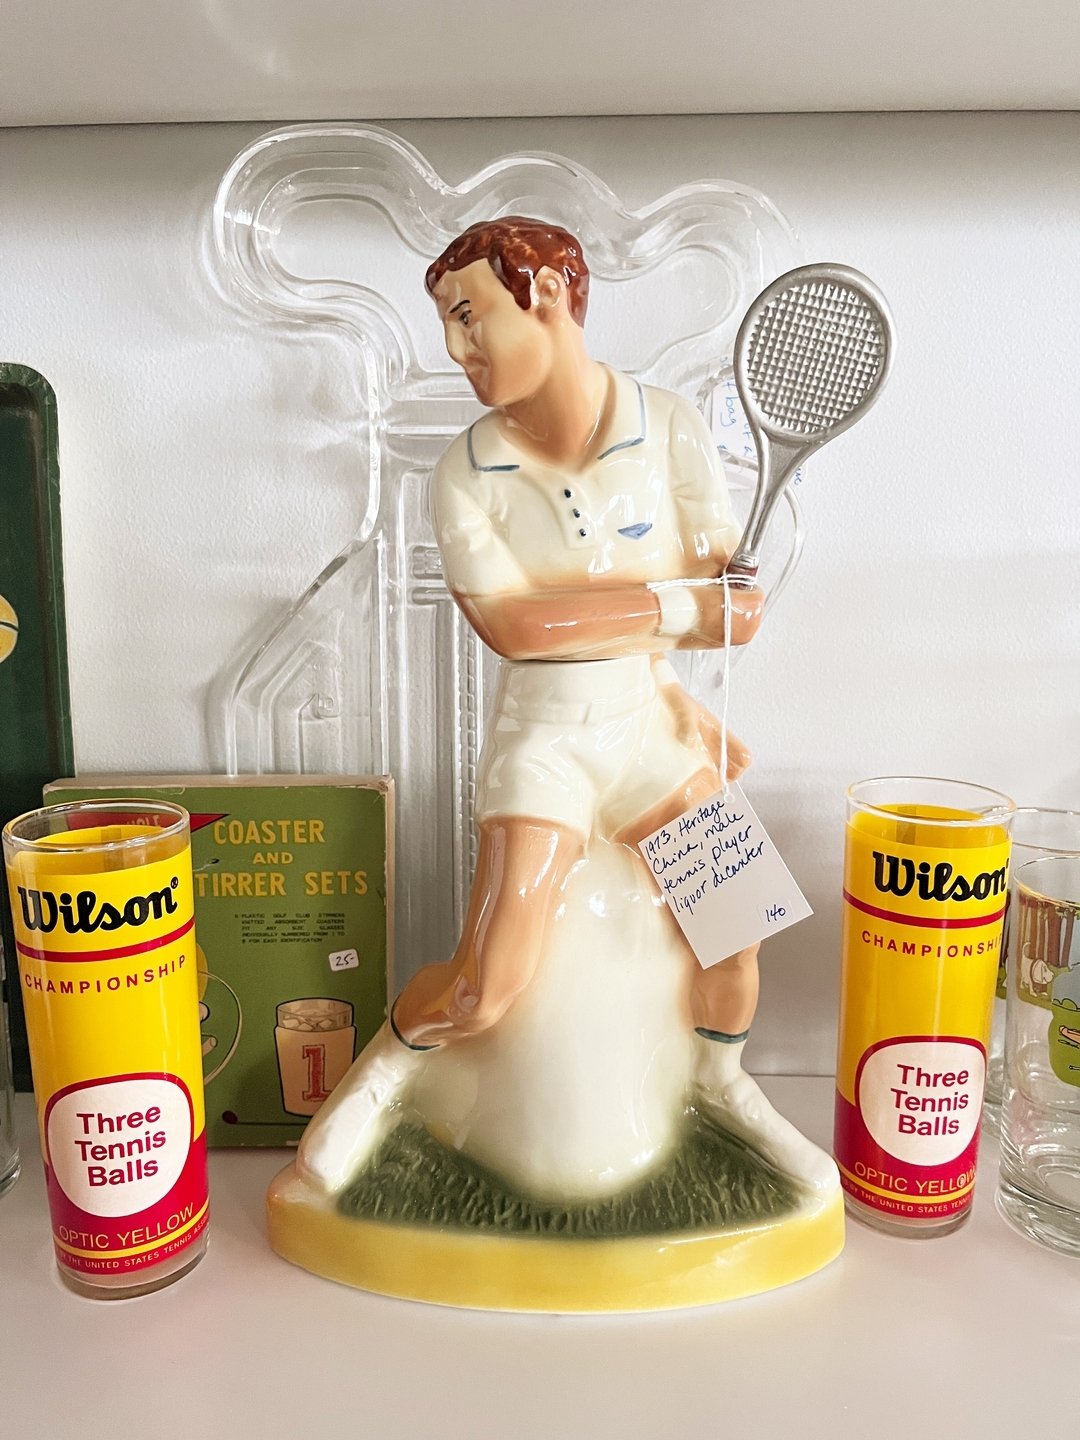 GAME + SET + MATCH = COCKTAIL TIME 🎾
Post match drinks just taste better with this Vintage tennis inspired decanter and our best selling vintage Wilson glasses. 

#melangeosterville #shopmelange #vintagebarware #shoposterville #shopthecape #shopcape